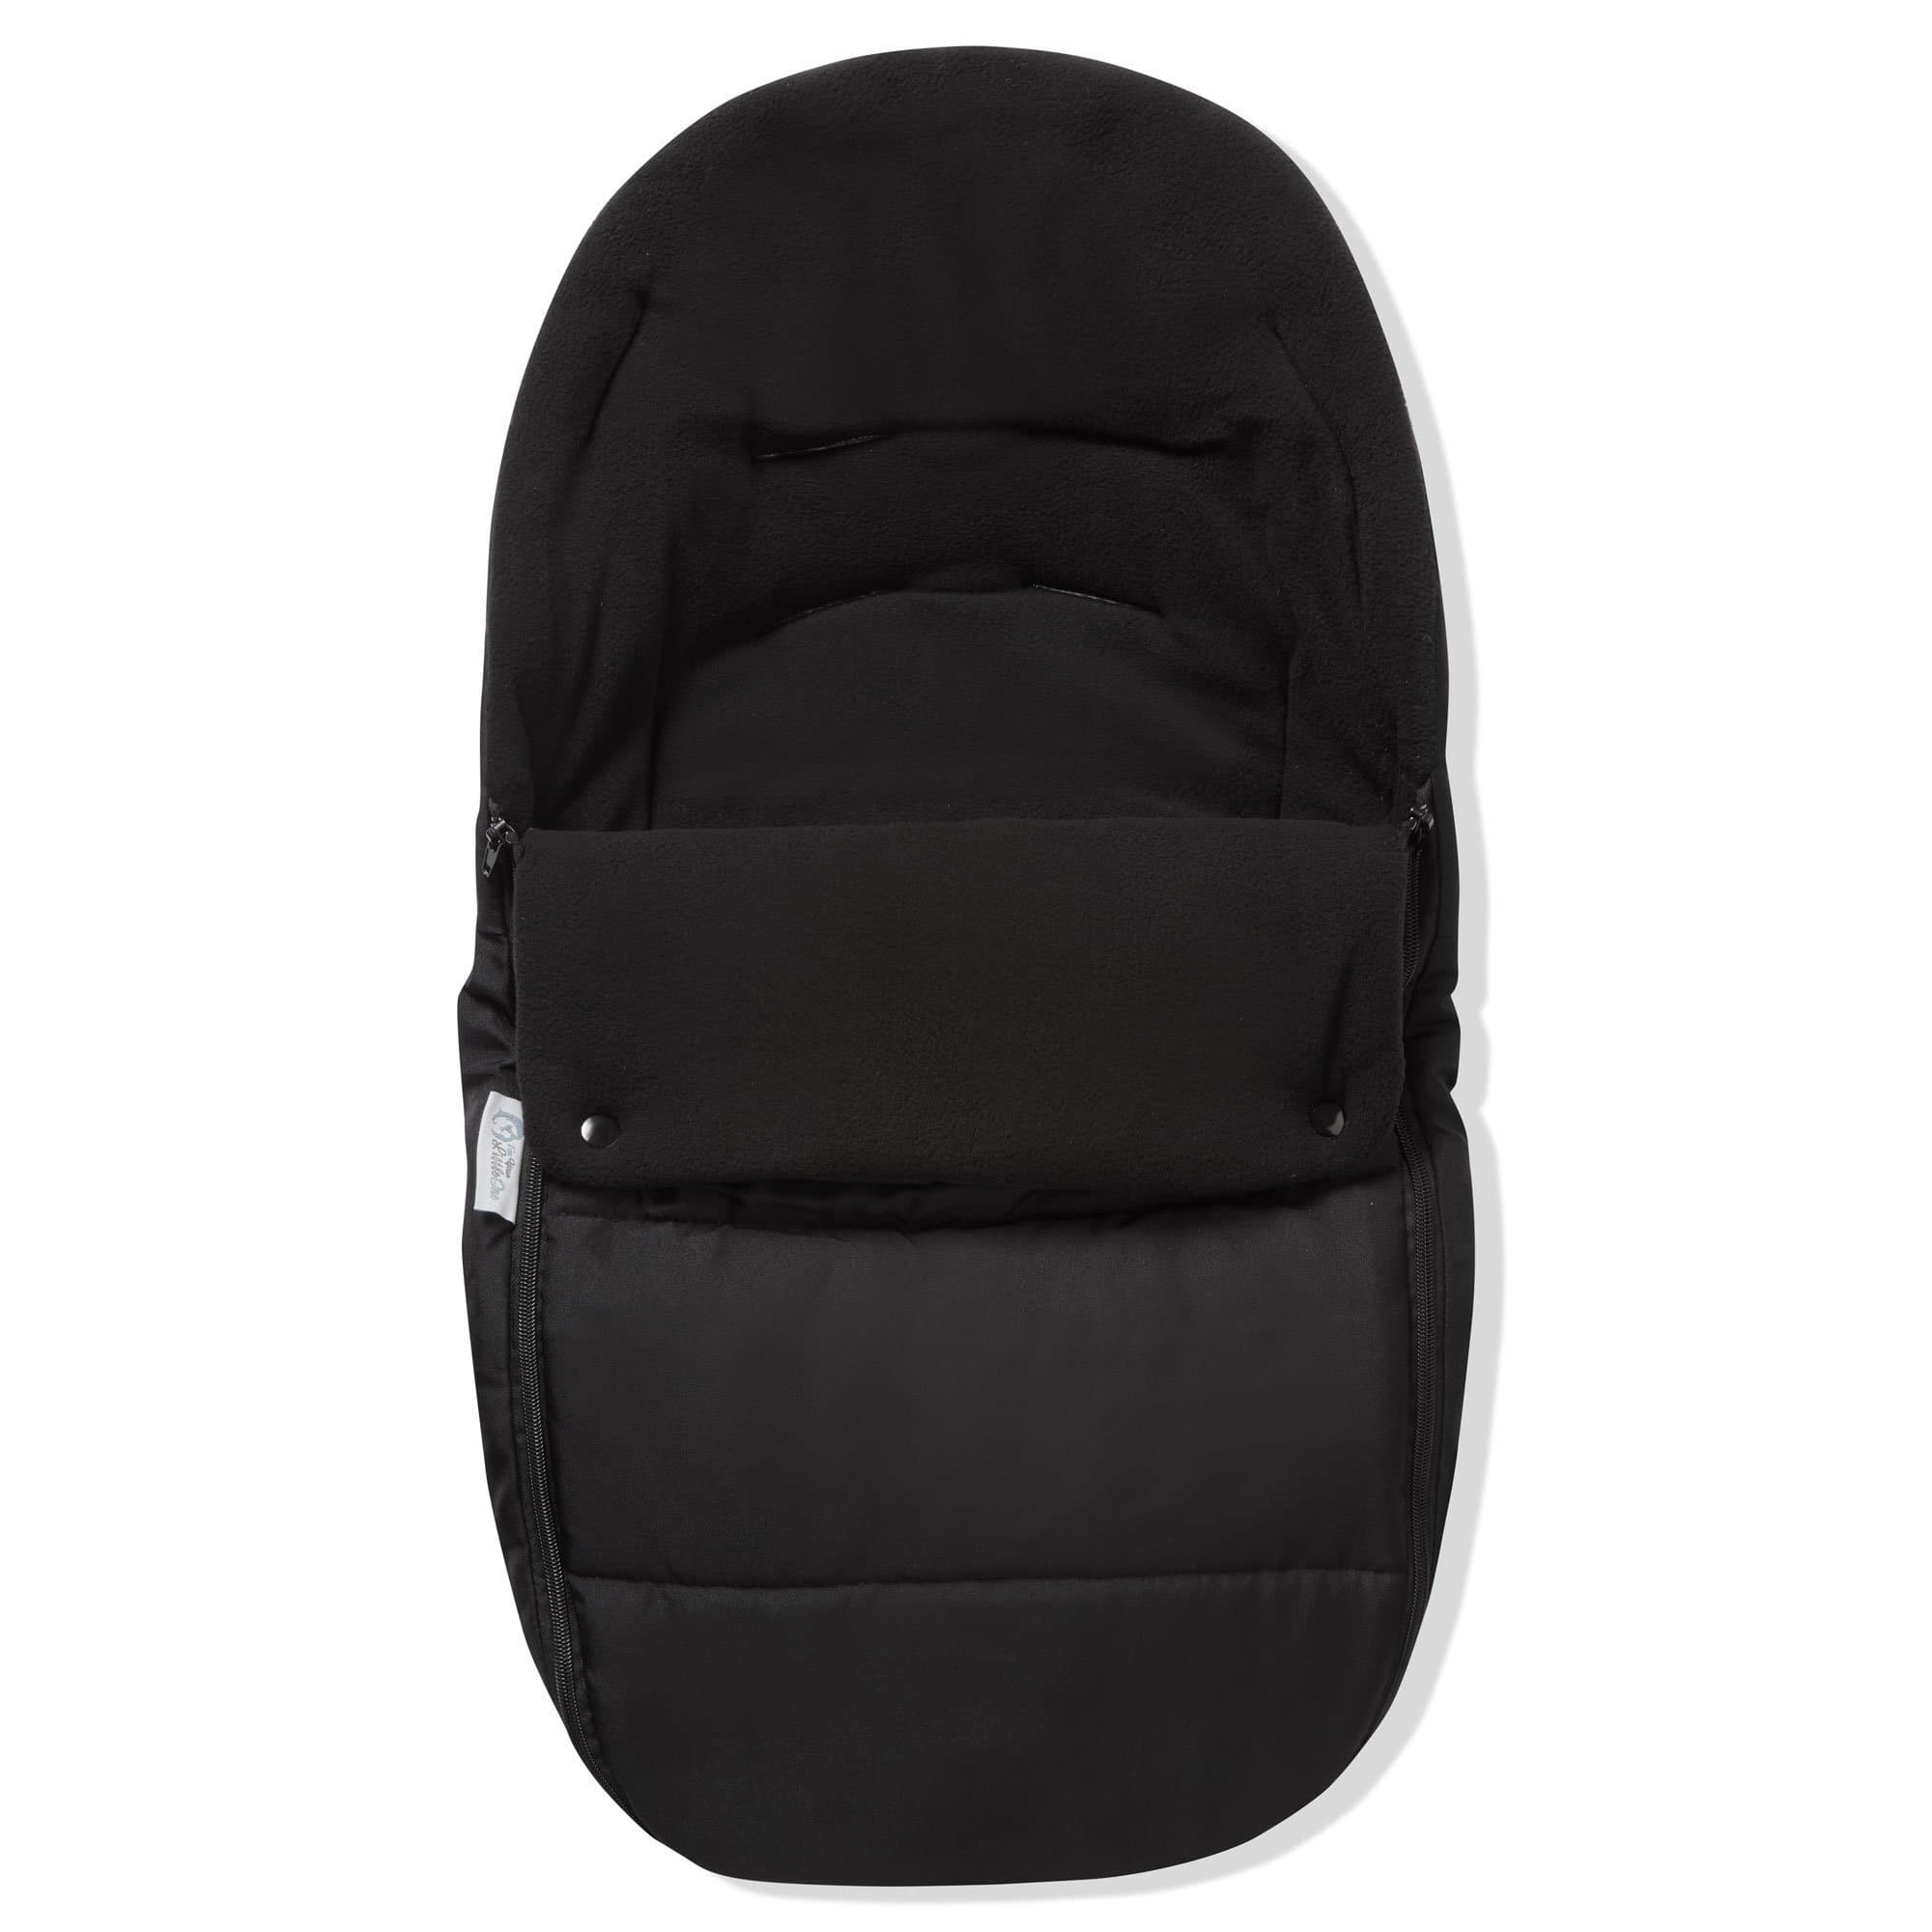 Premium Car Seat Footmuff / Cosy Toes Compatible with Doona - Black Jack / Fits All Models | For Your Little One